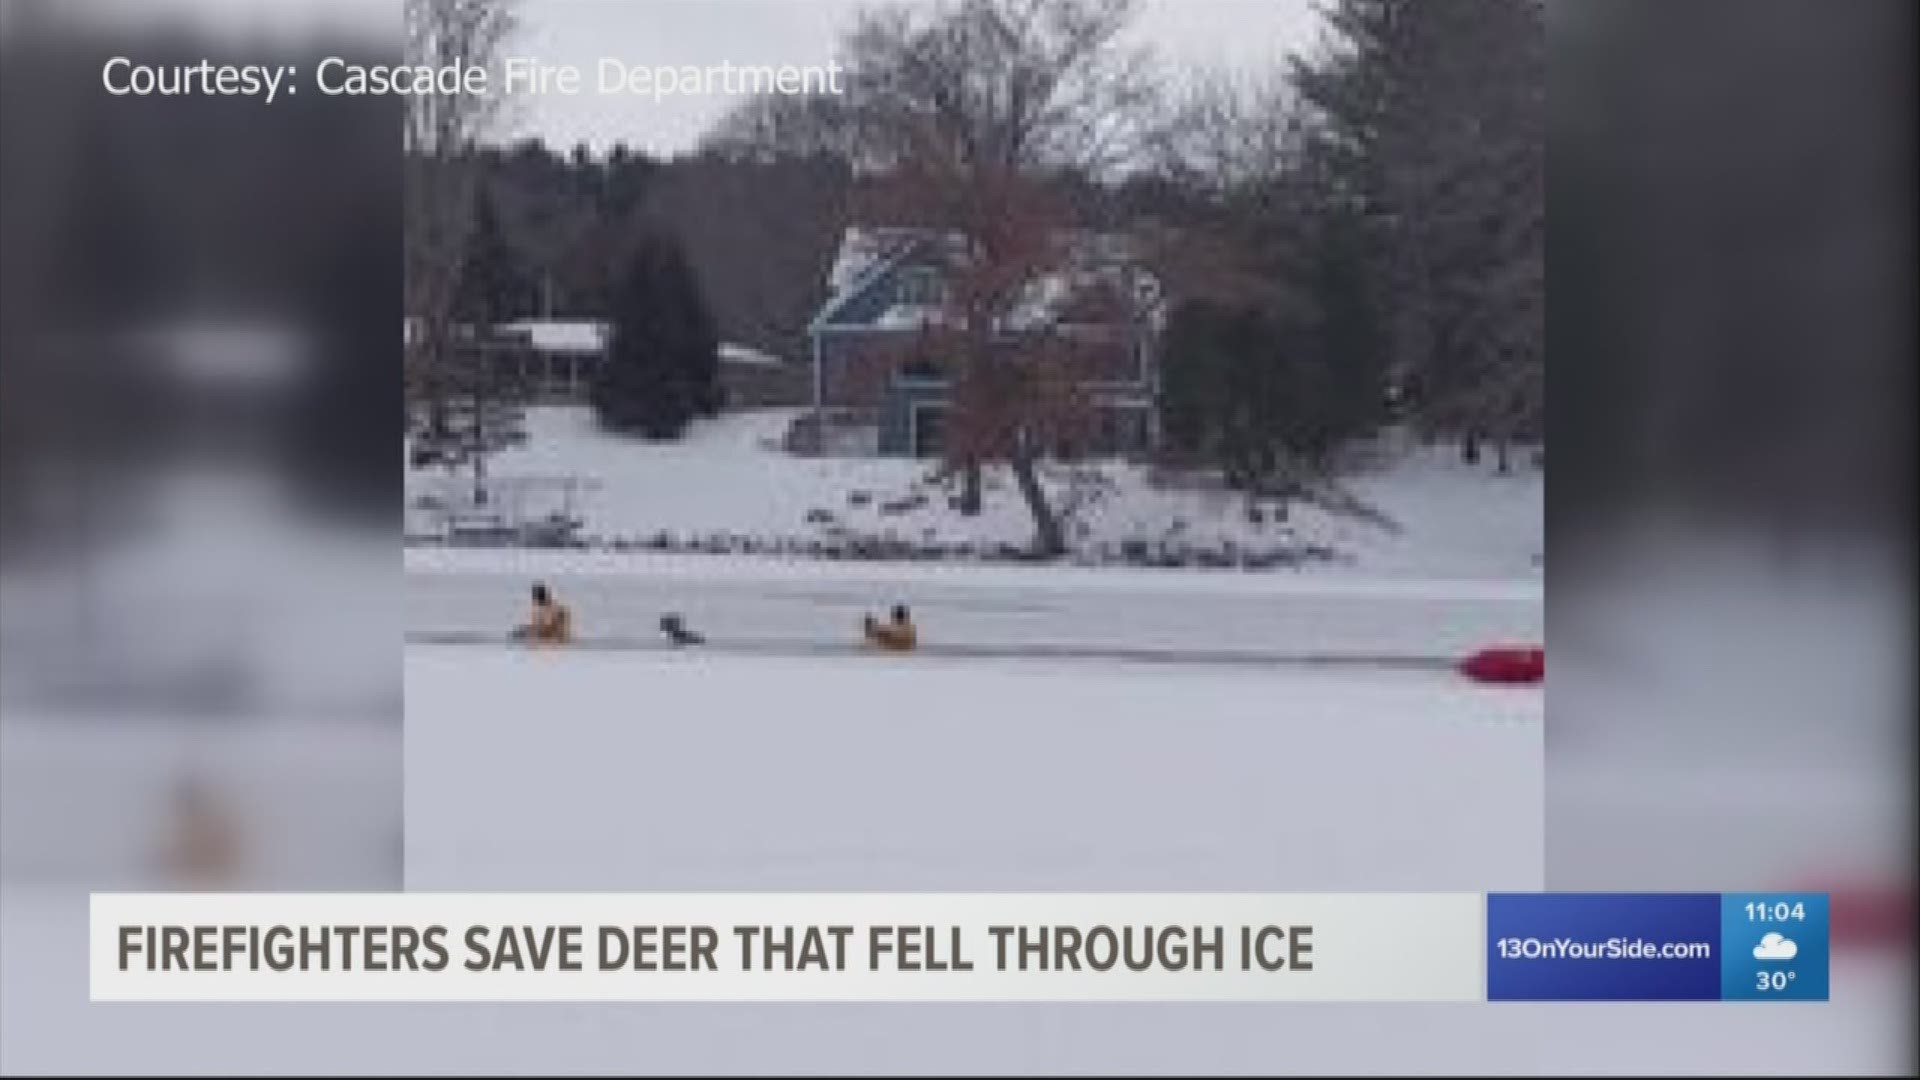 Firefighters received ice rescue training while saving a deer that fell through ice on the Thornapple River